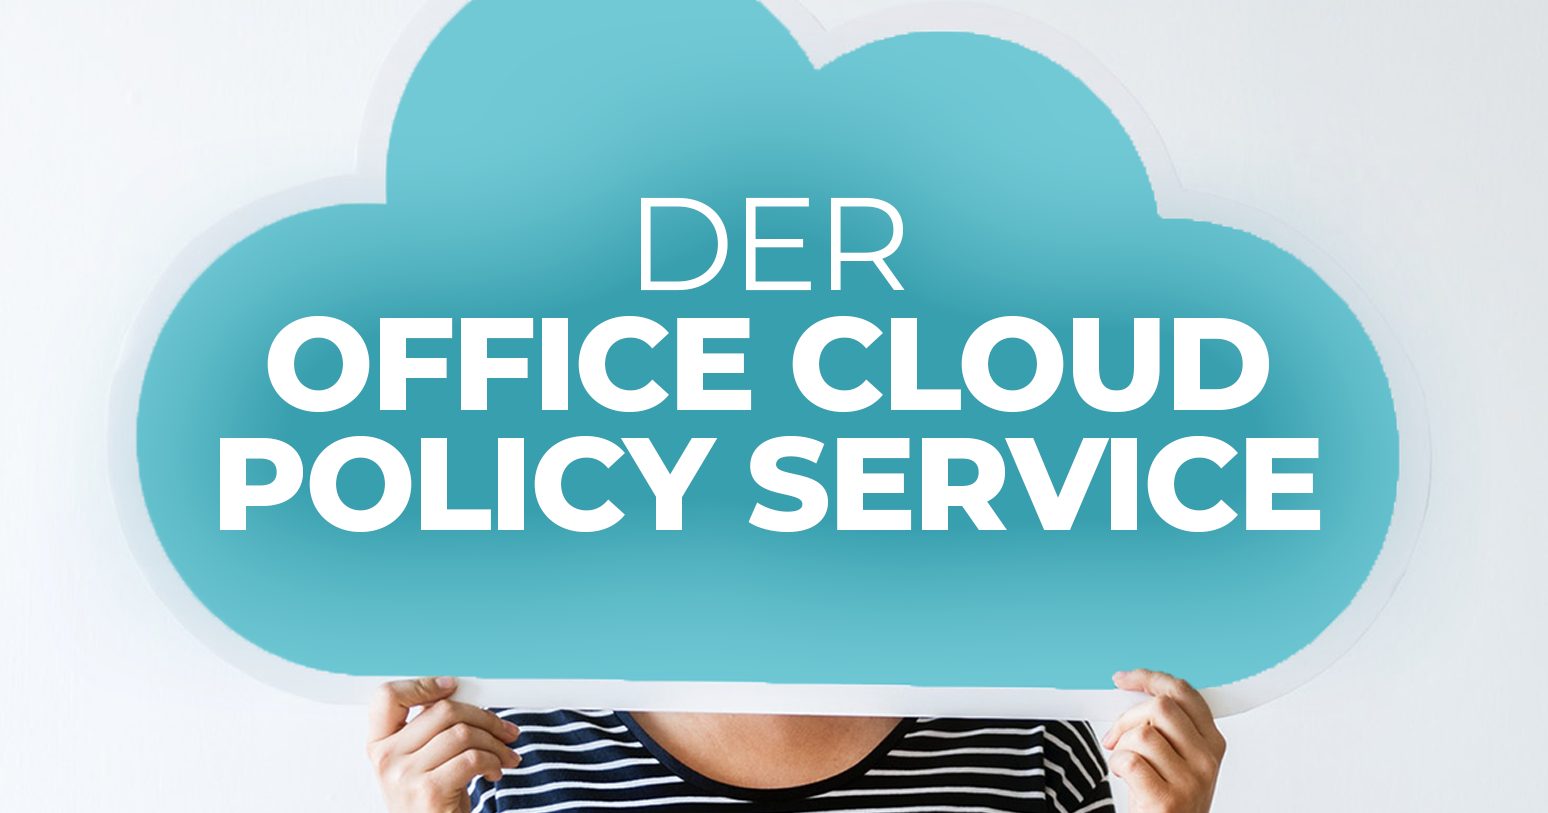 Der Office Cloud Policy Service